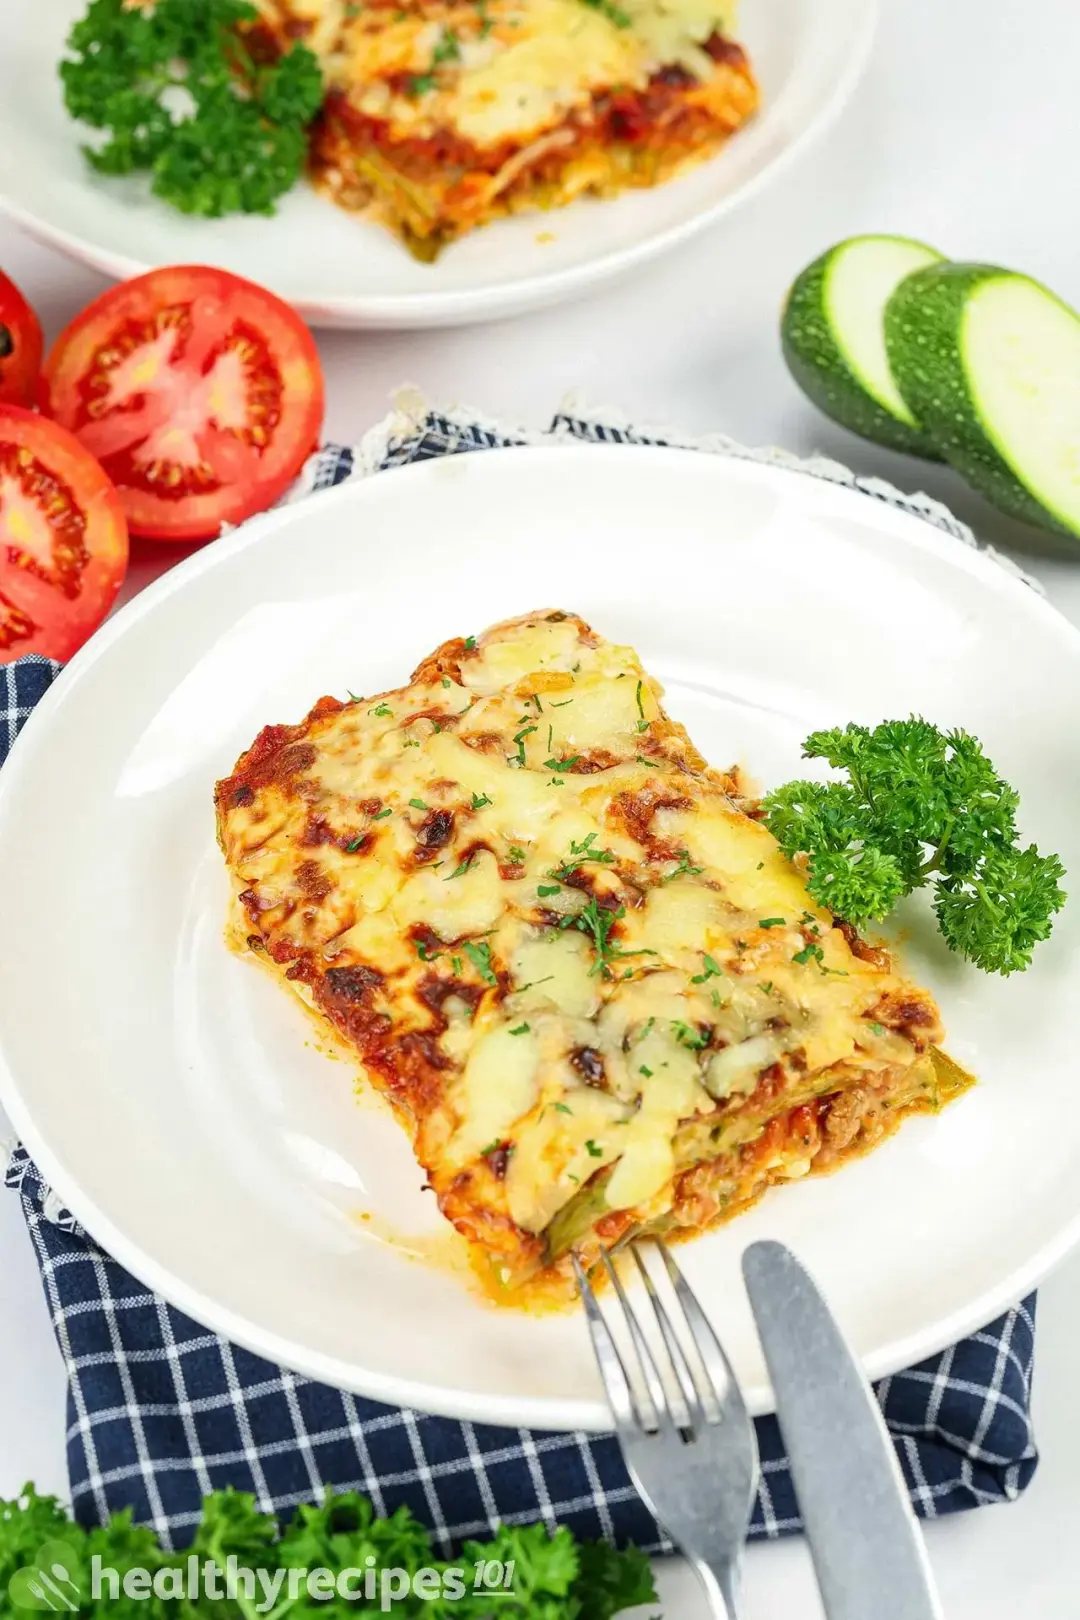 What to Serve with Zucchini Lasagna